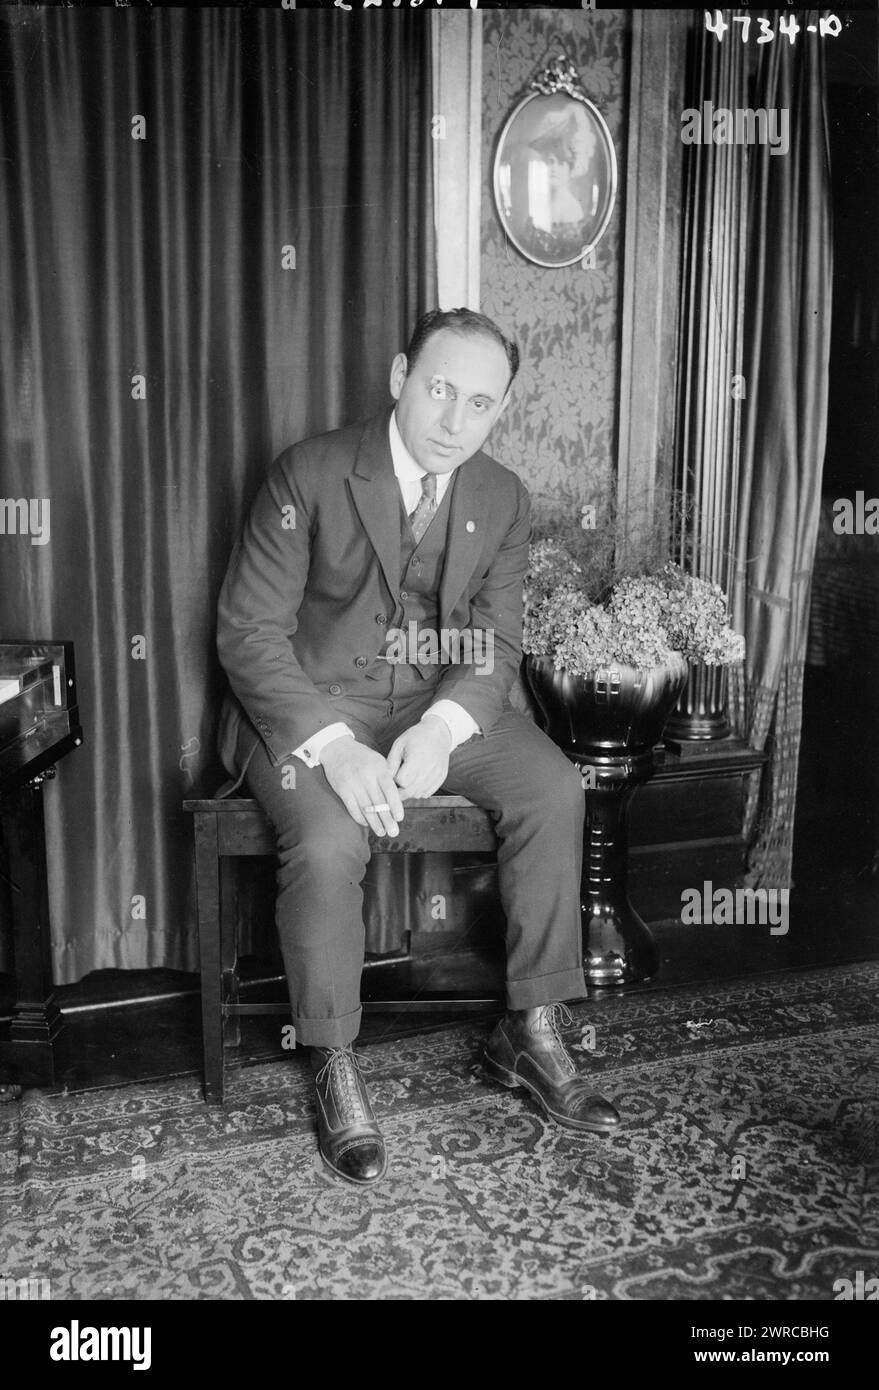 Fields, Photograph shows Arthur Fields (1884-1953) who was a singer and songwriter., between ca. 1915 and ca. 1920, Glass negatives, 1 negative: glass Stock Photo